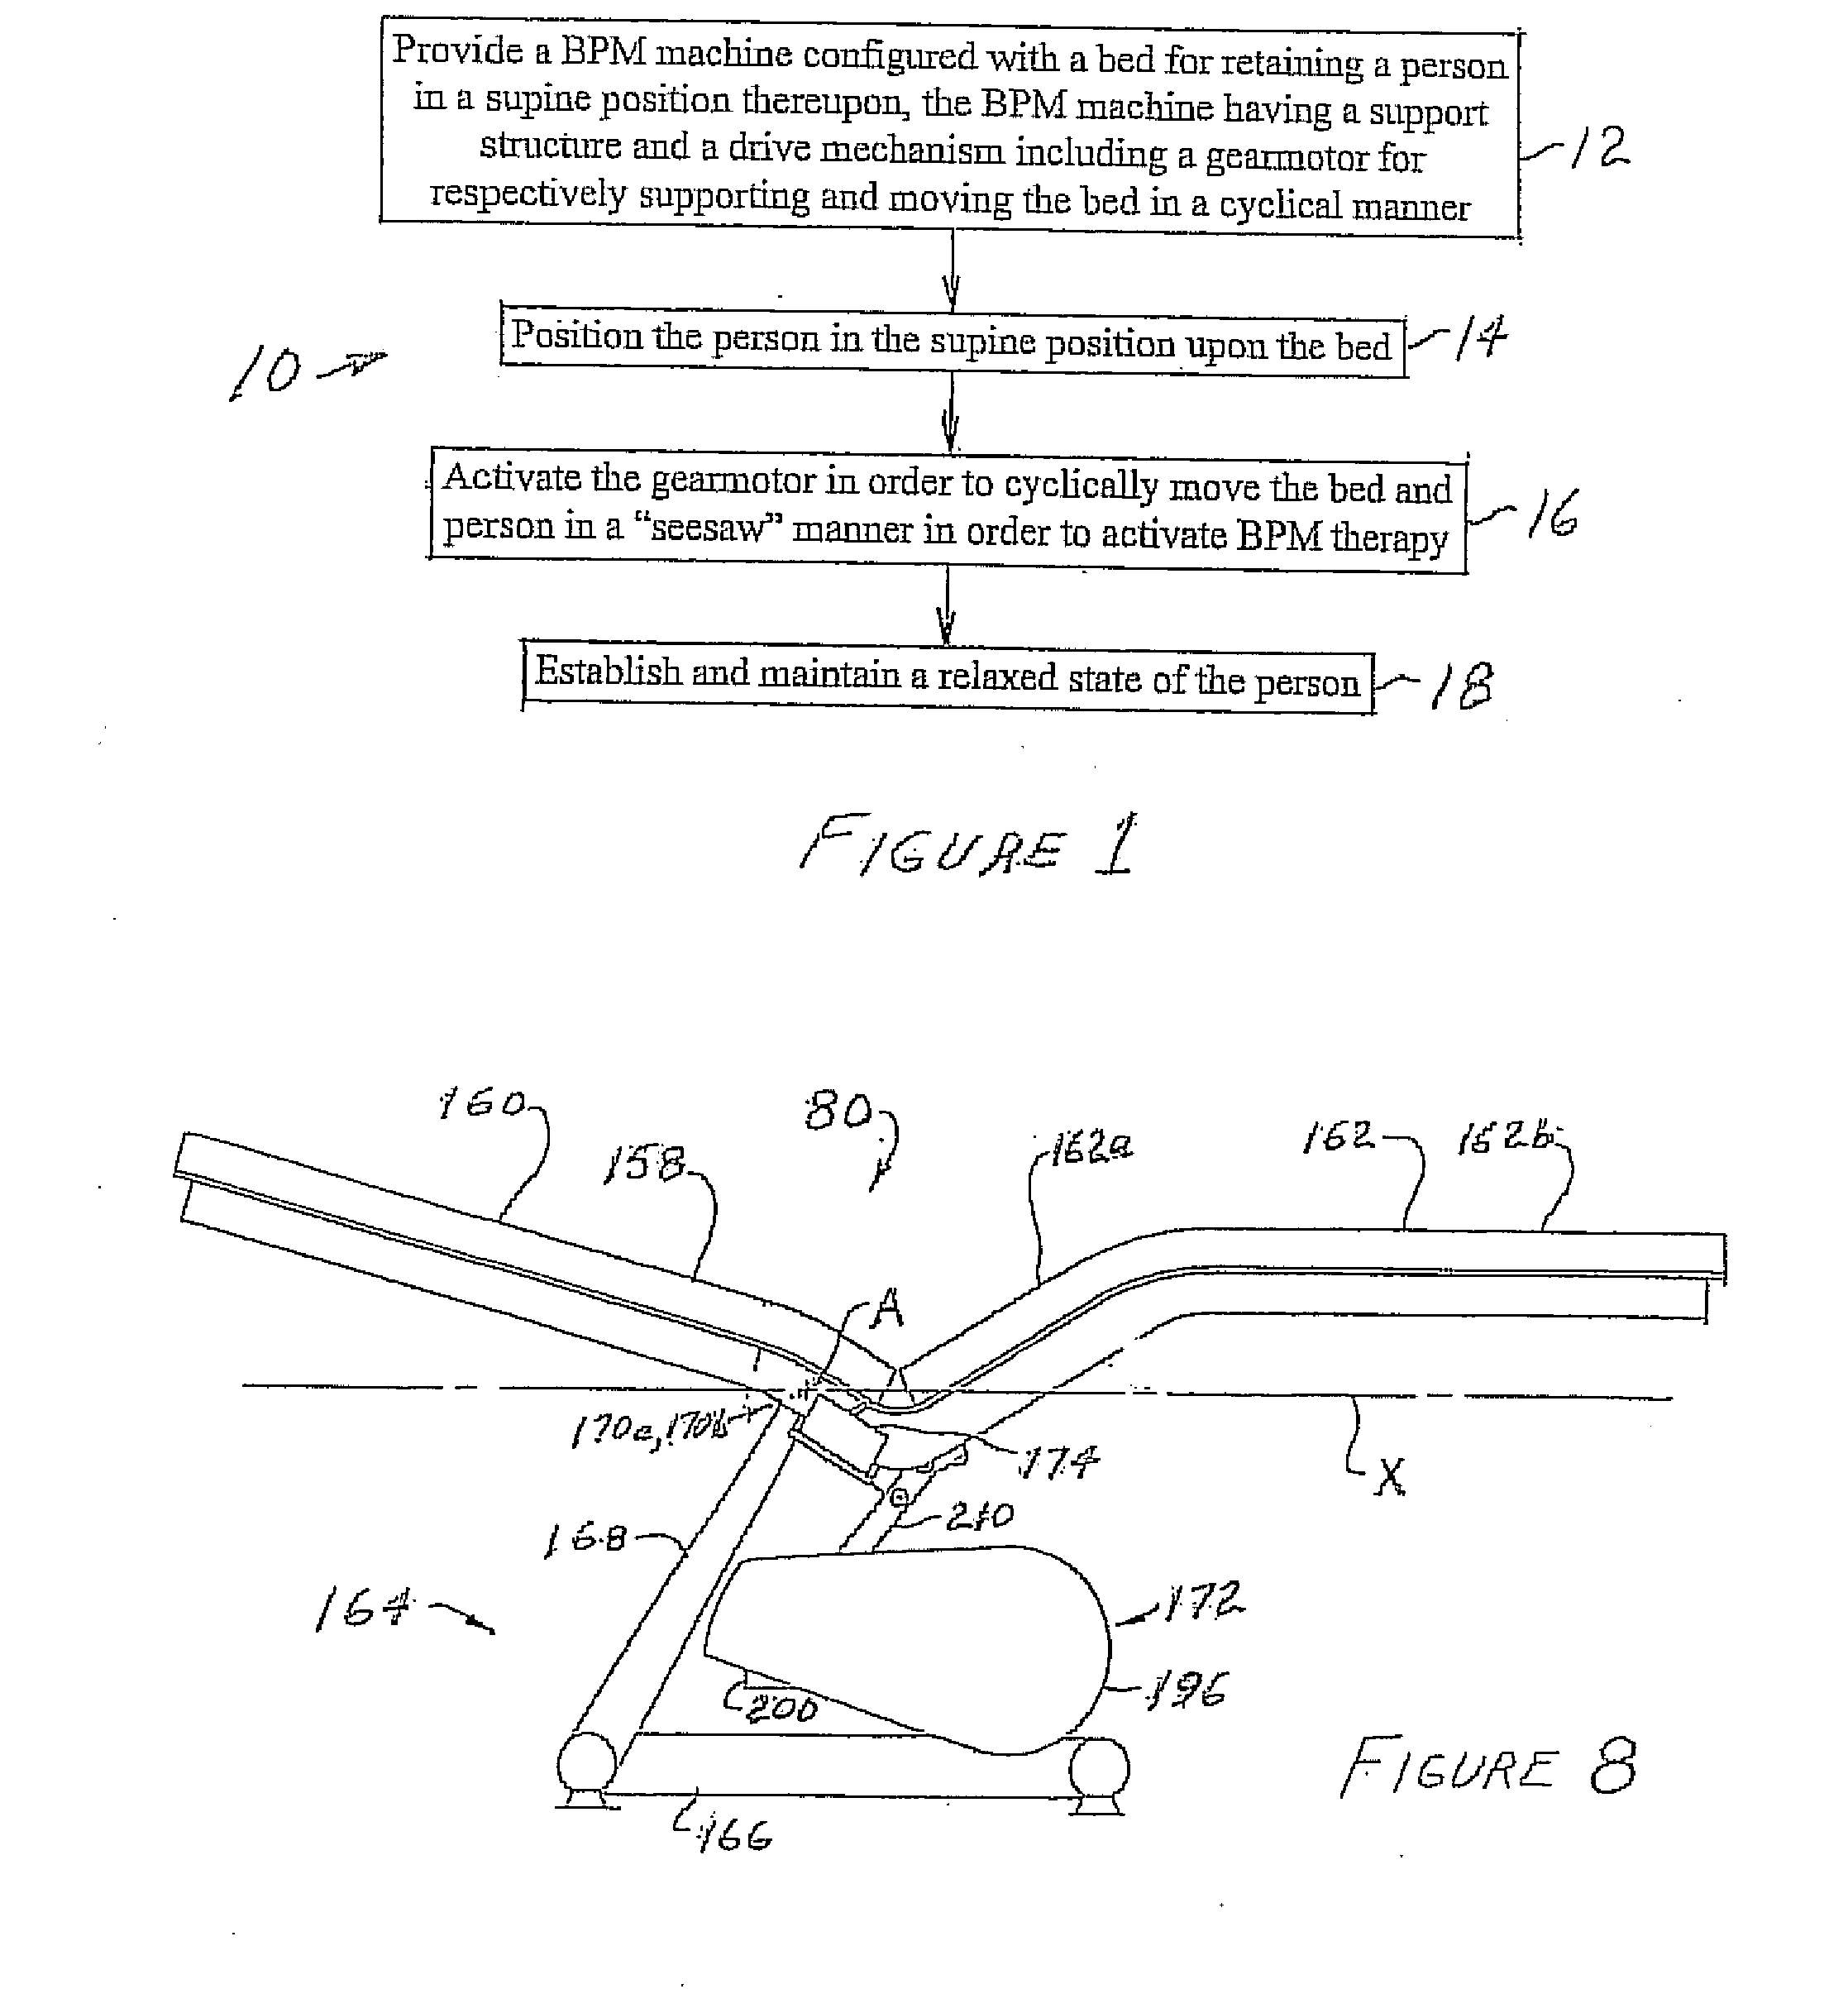 Therapeutic device for inducing blood pressure modulation